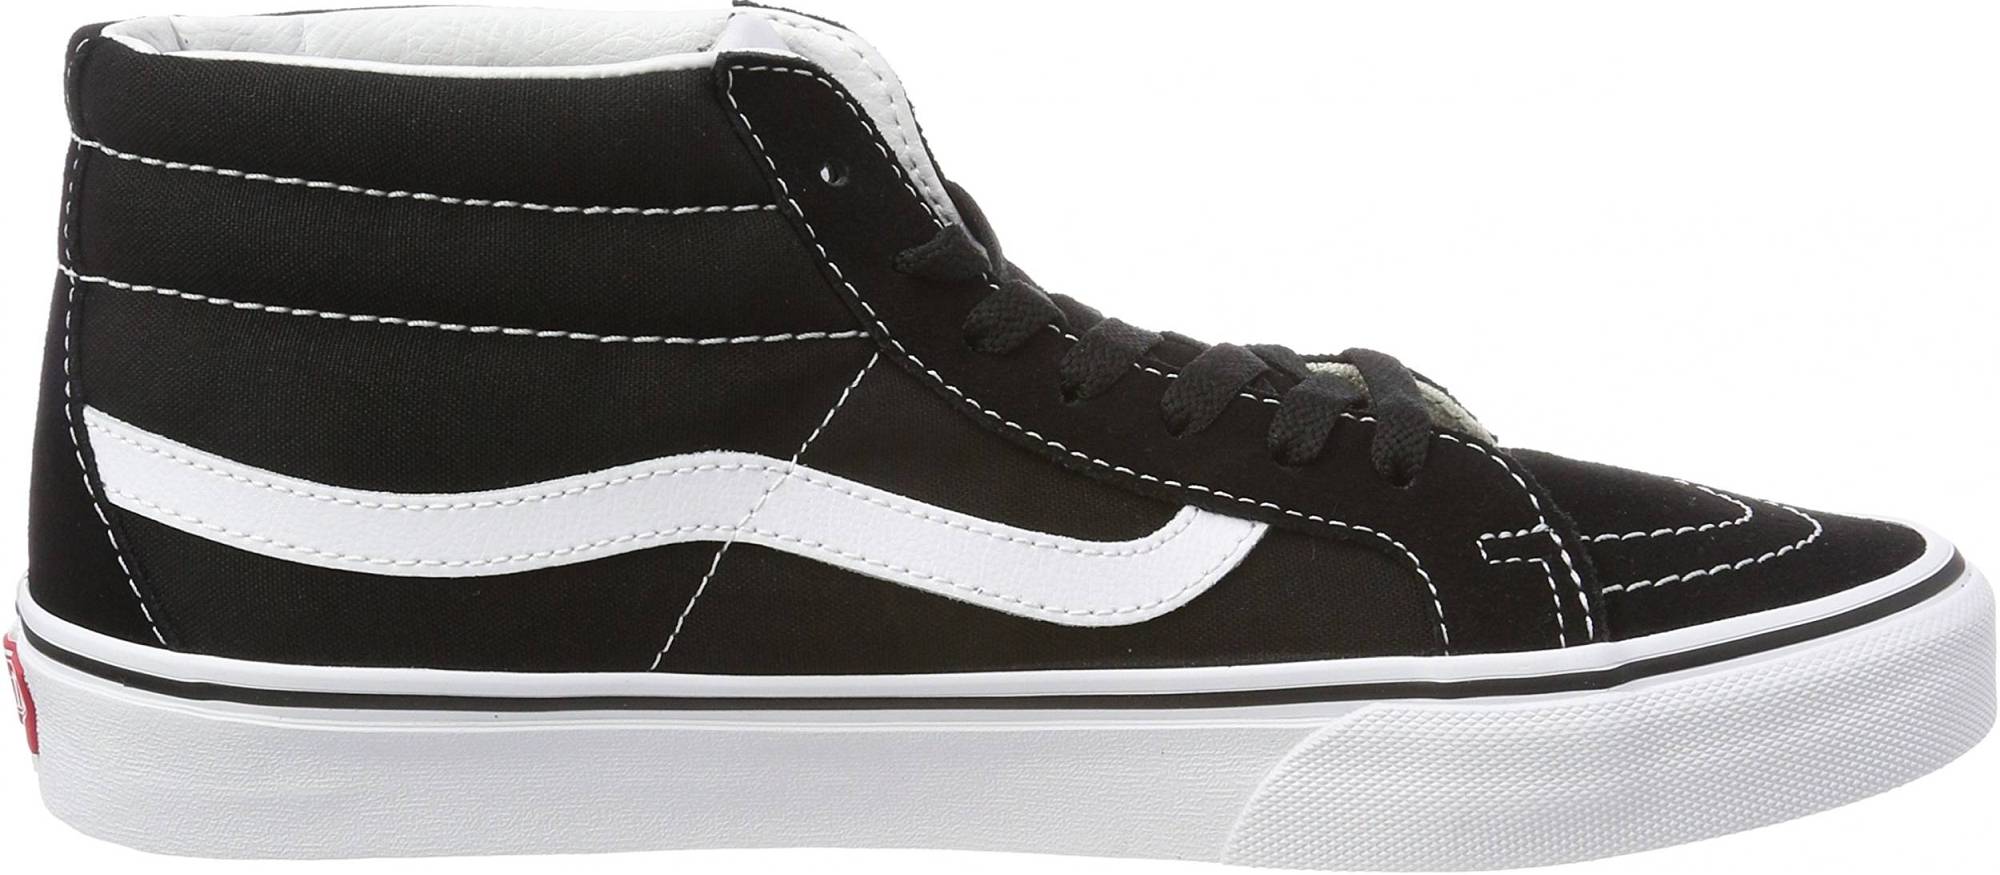 Vans SK8-Mid Reissue – Shoes Reviews & Reasons To Buy